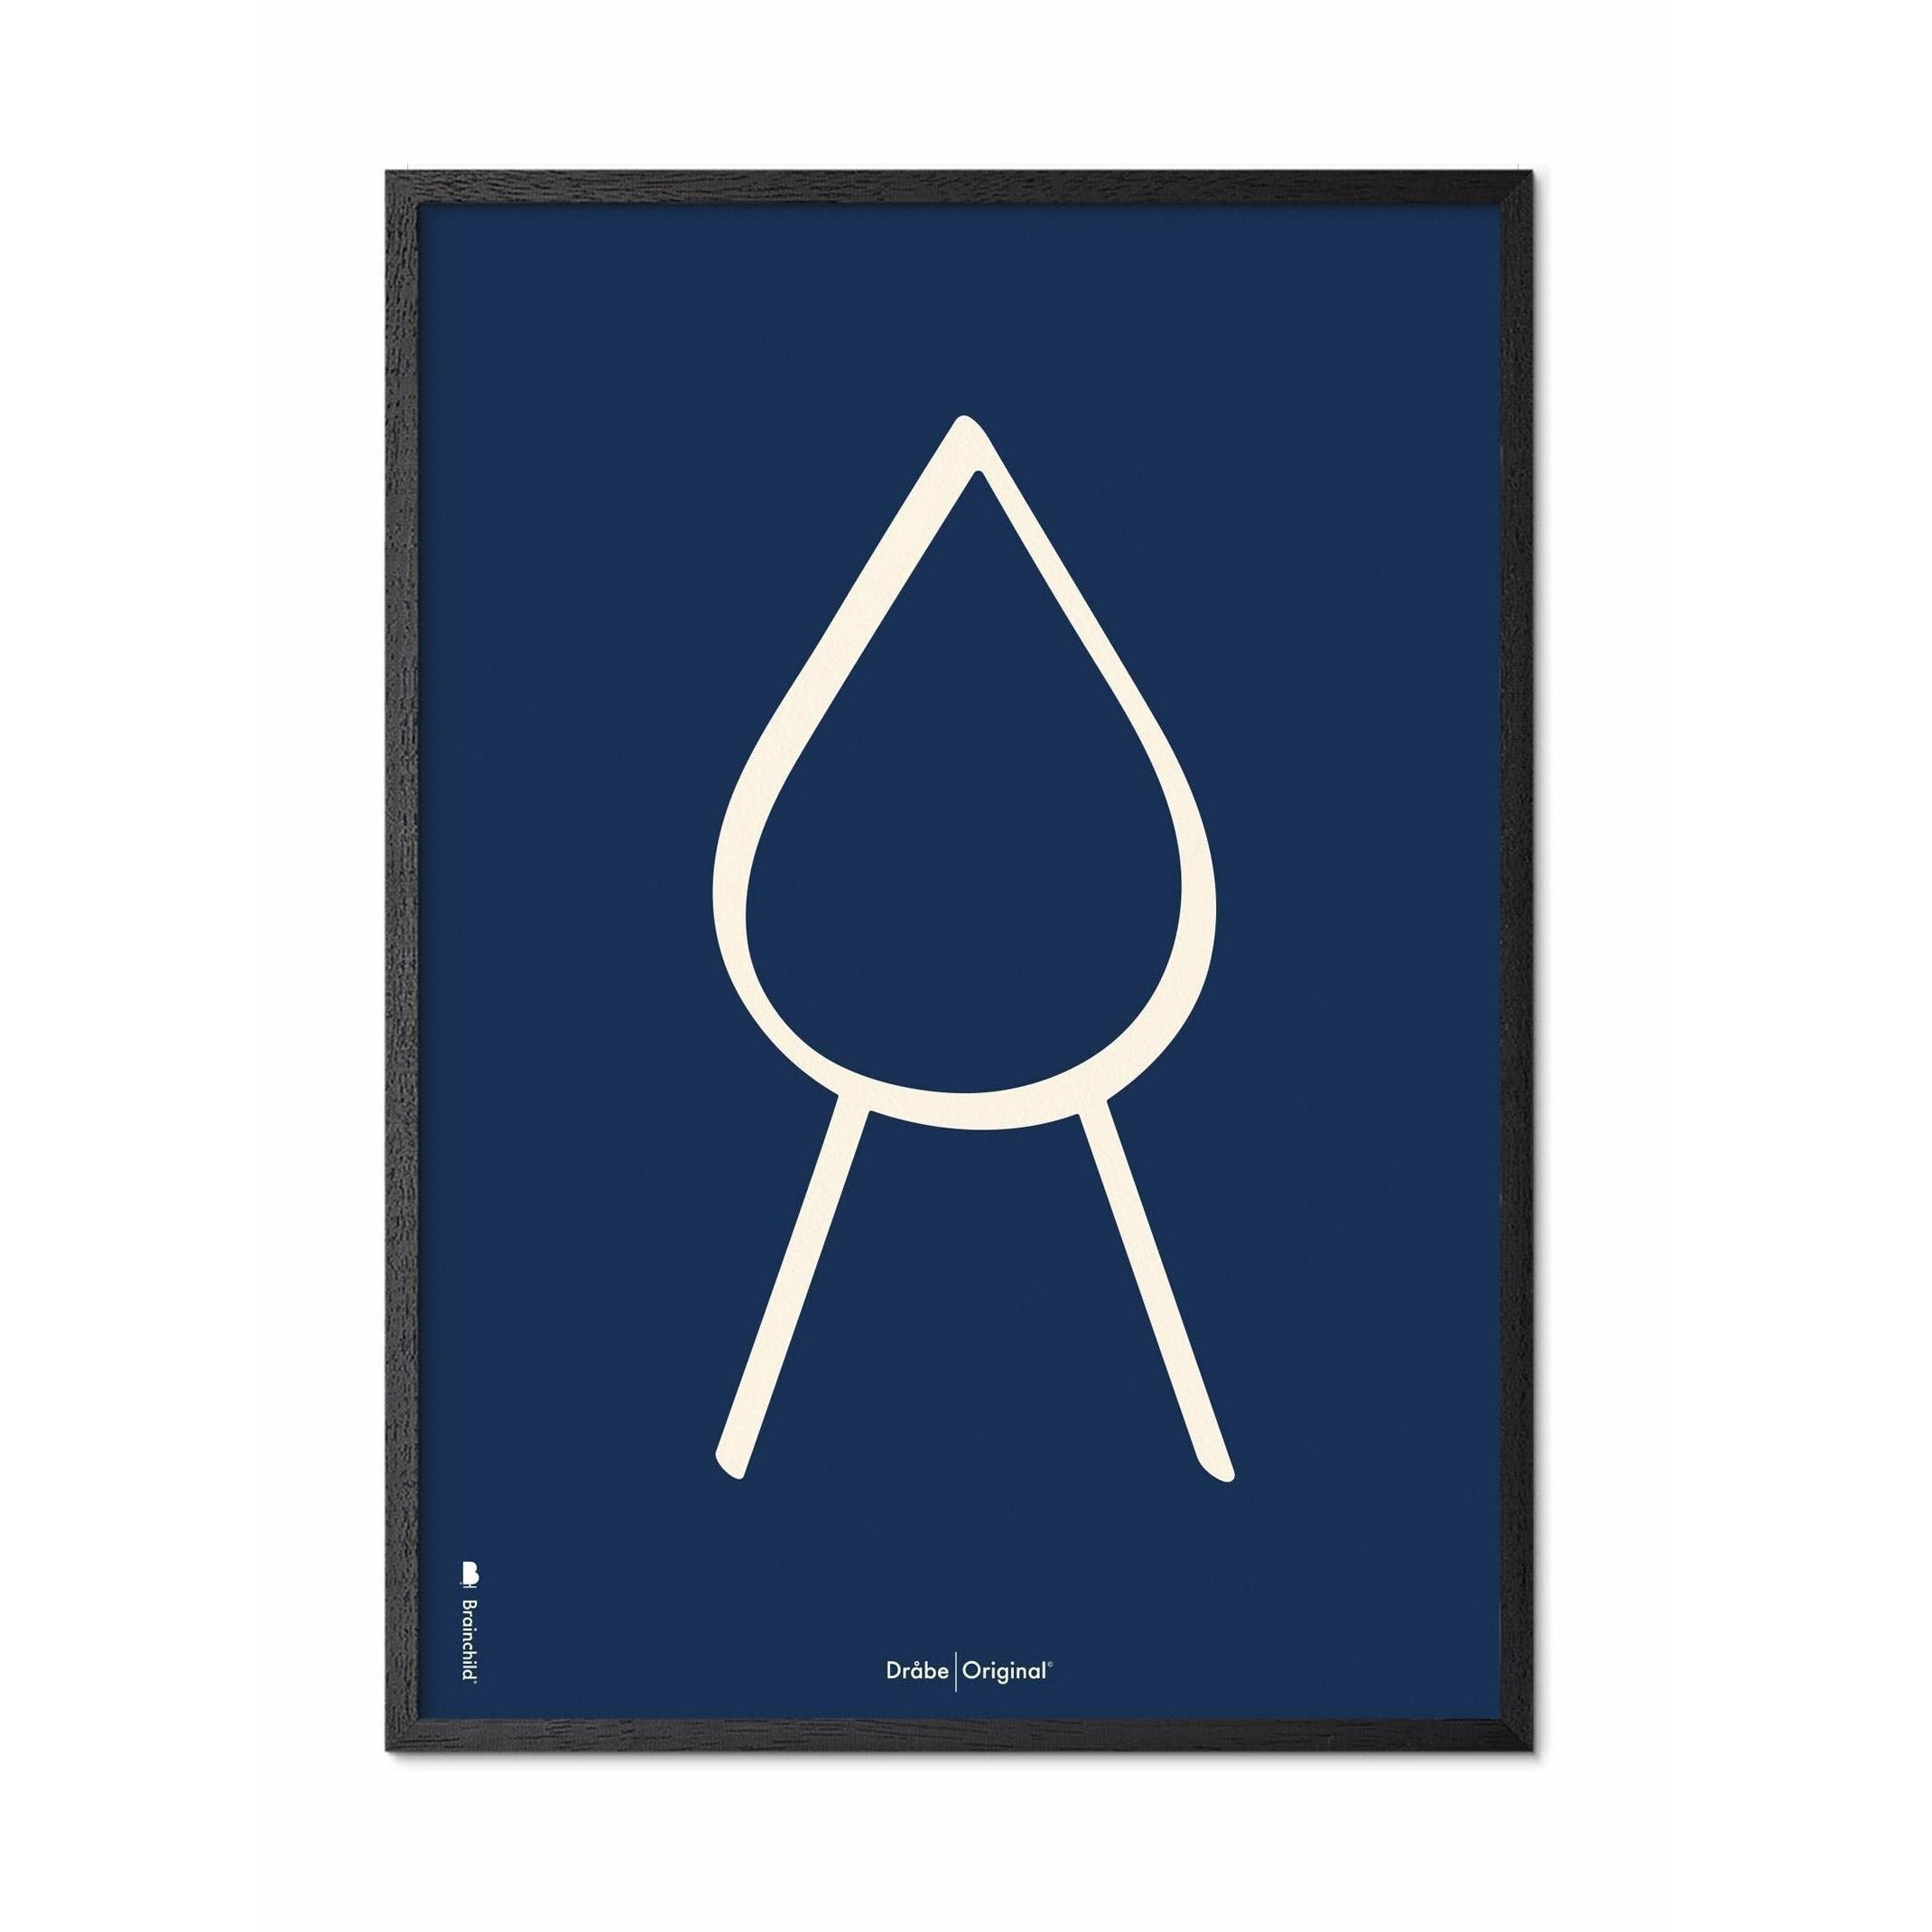 Brainchild Drop Line Poster, Frame In Black Lacquered Wood 30x40 Cm, Blue Background